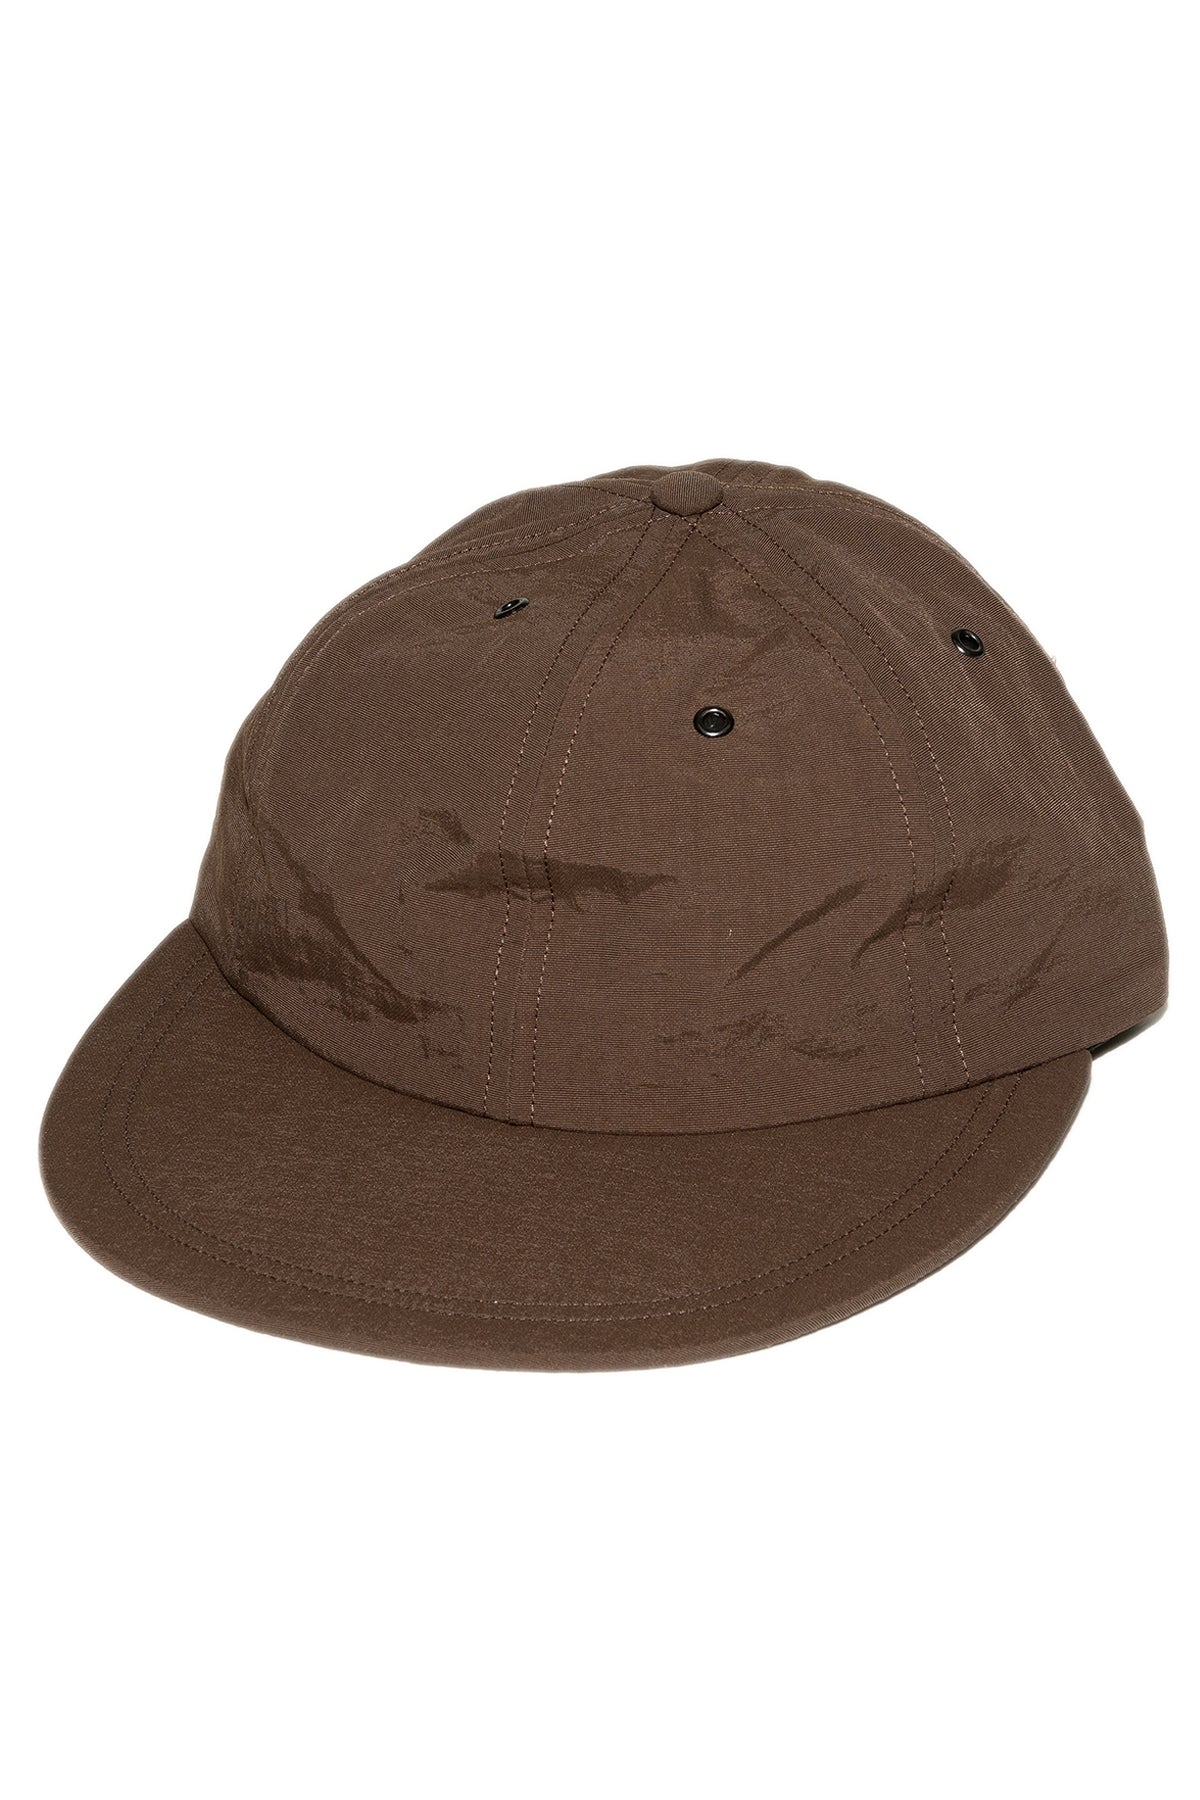 understory-shop - SELECTS - WIDE BRIM 6 PANEL